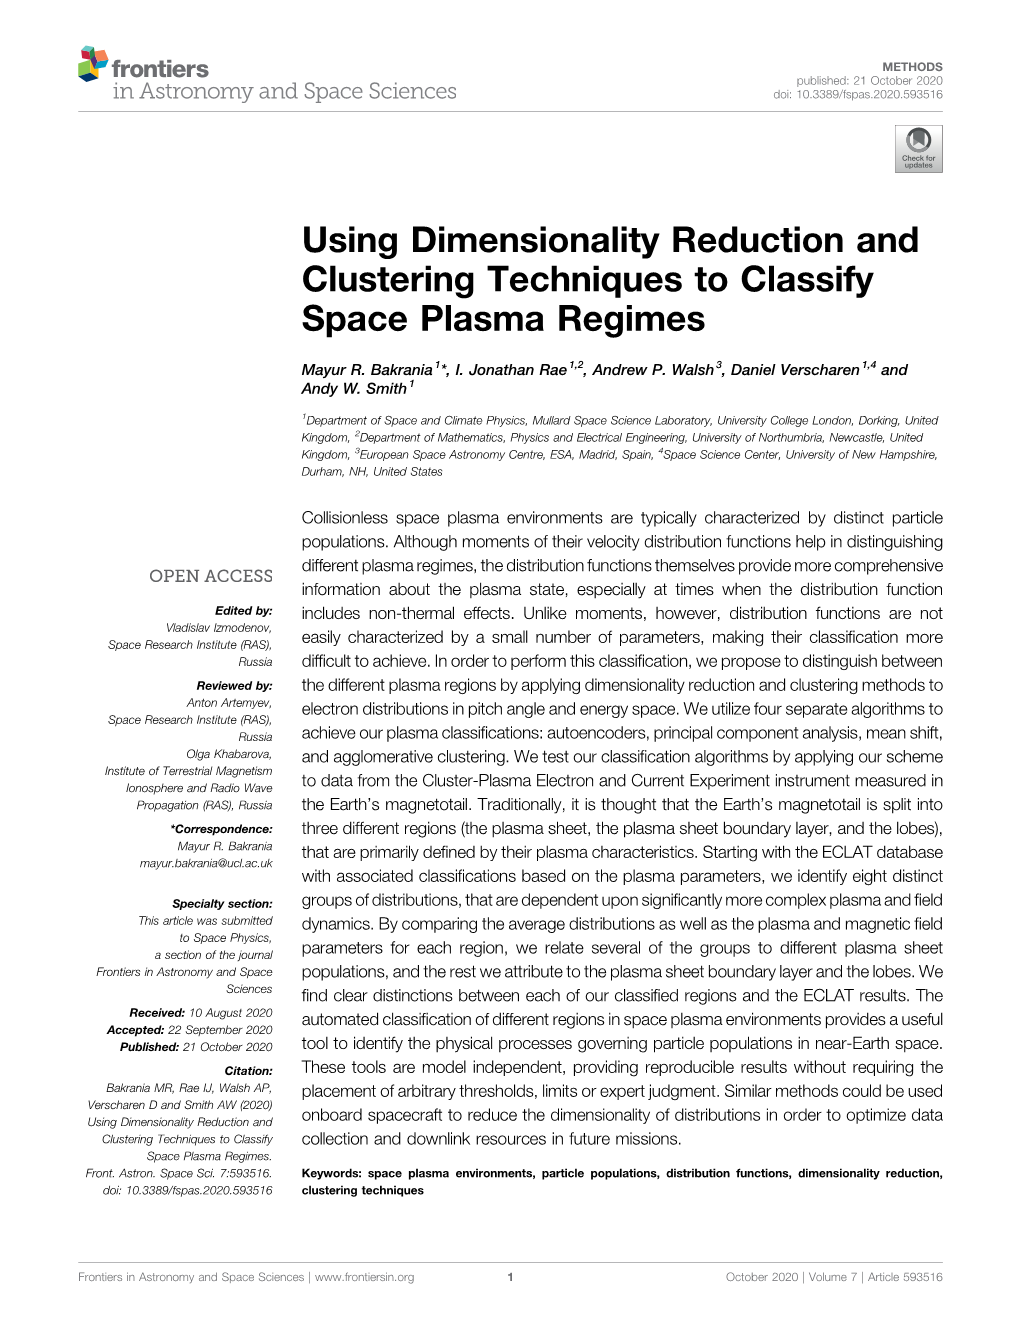 Using Dimensionality Reduction and Clustering Techniques to Classify Space Plasma Regimes